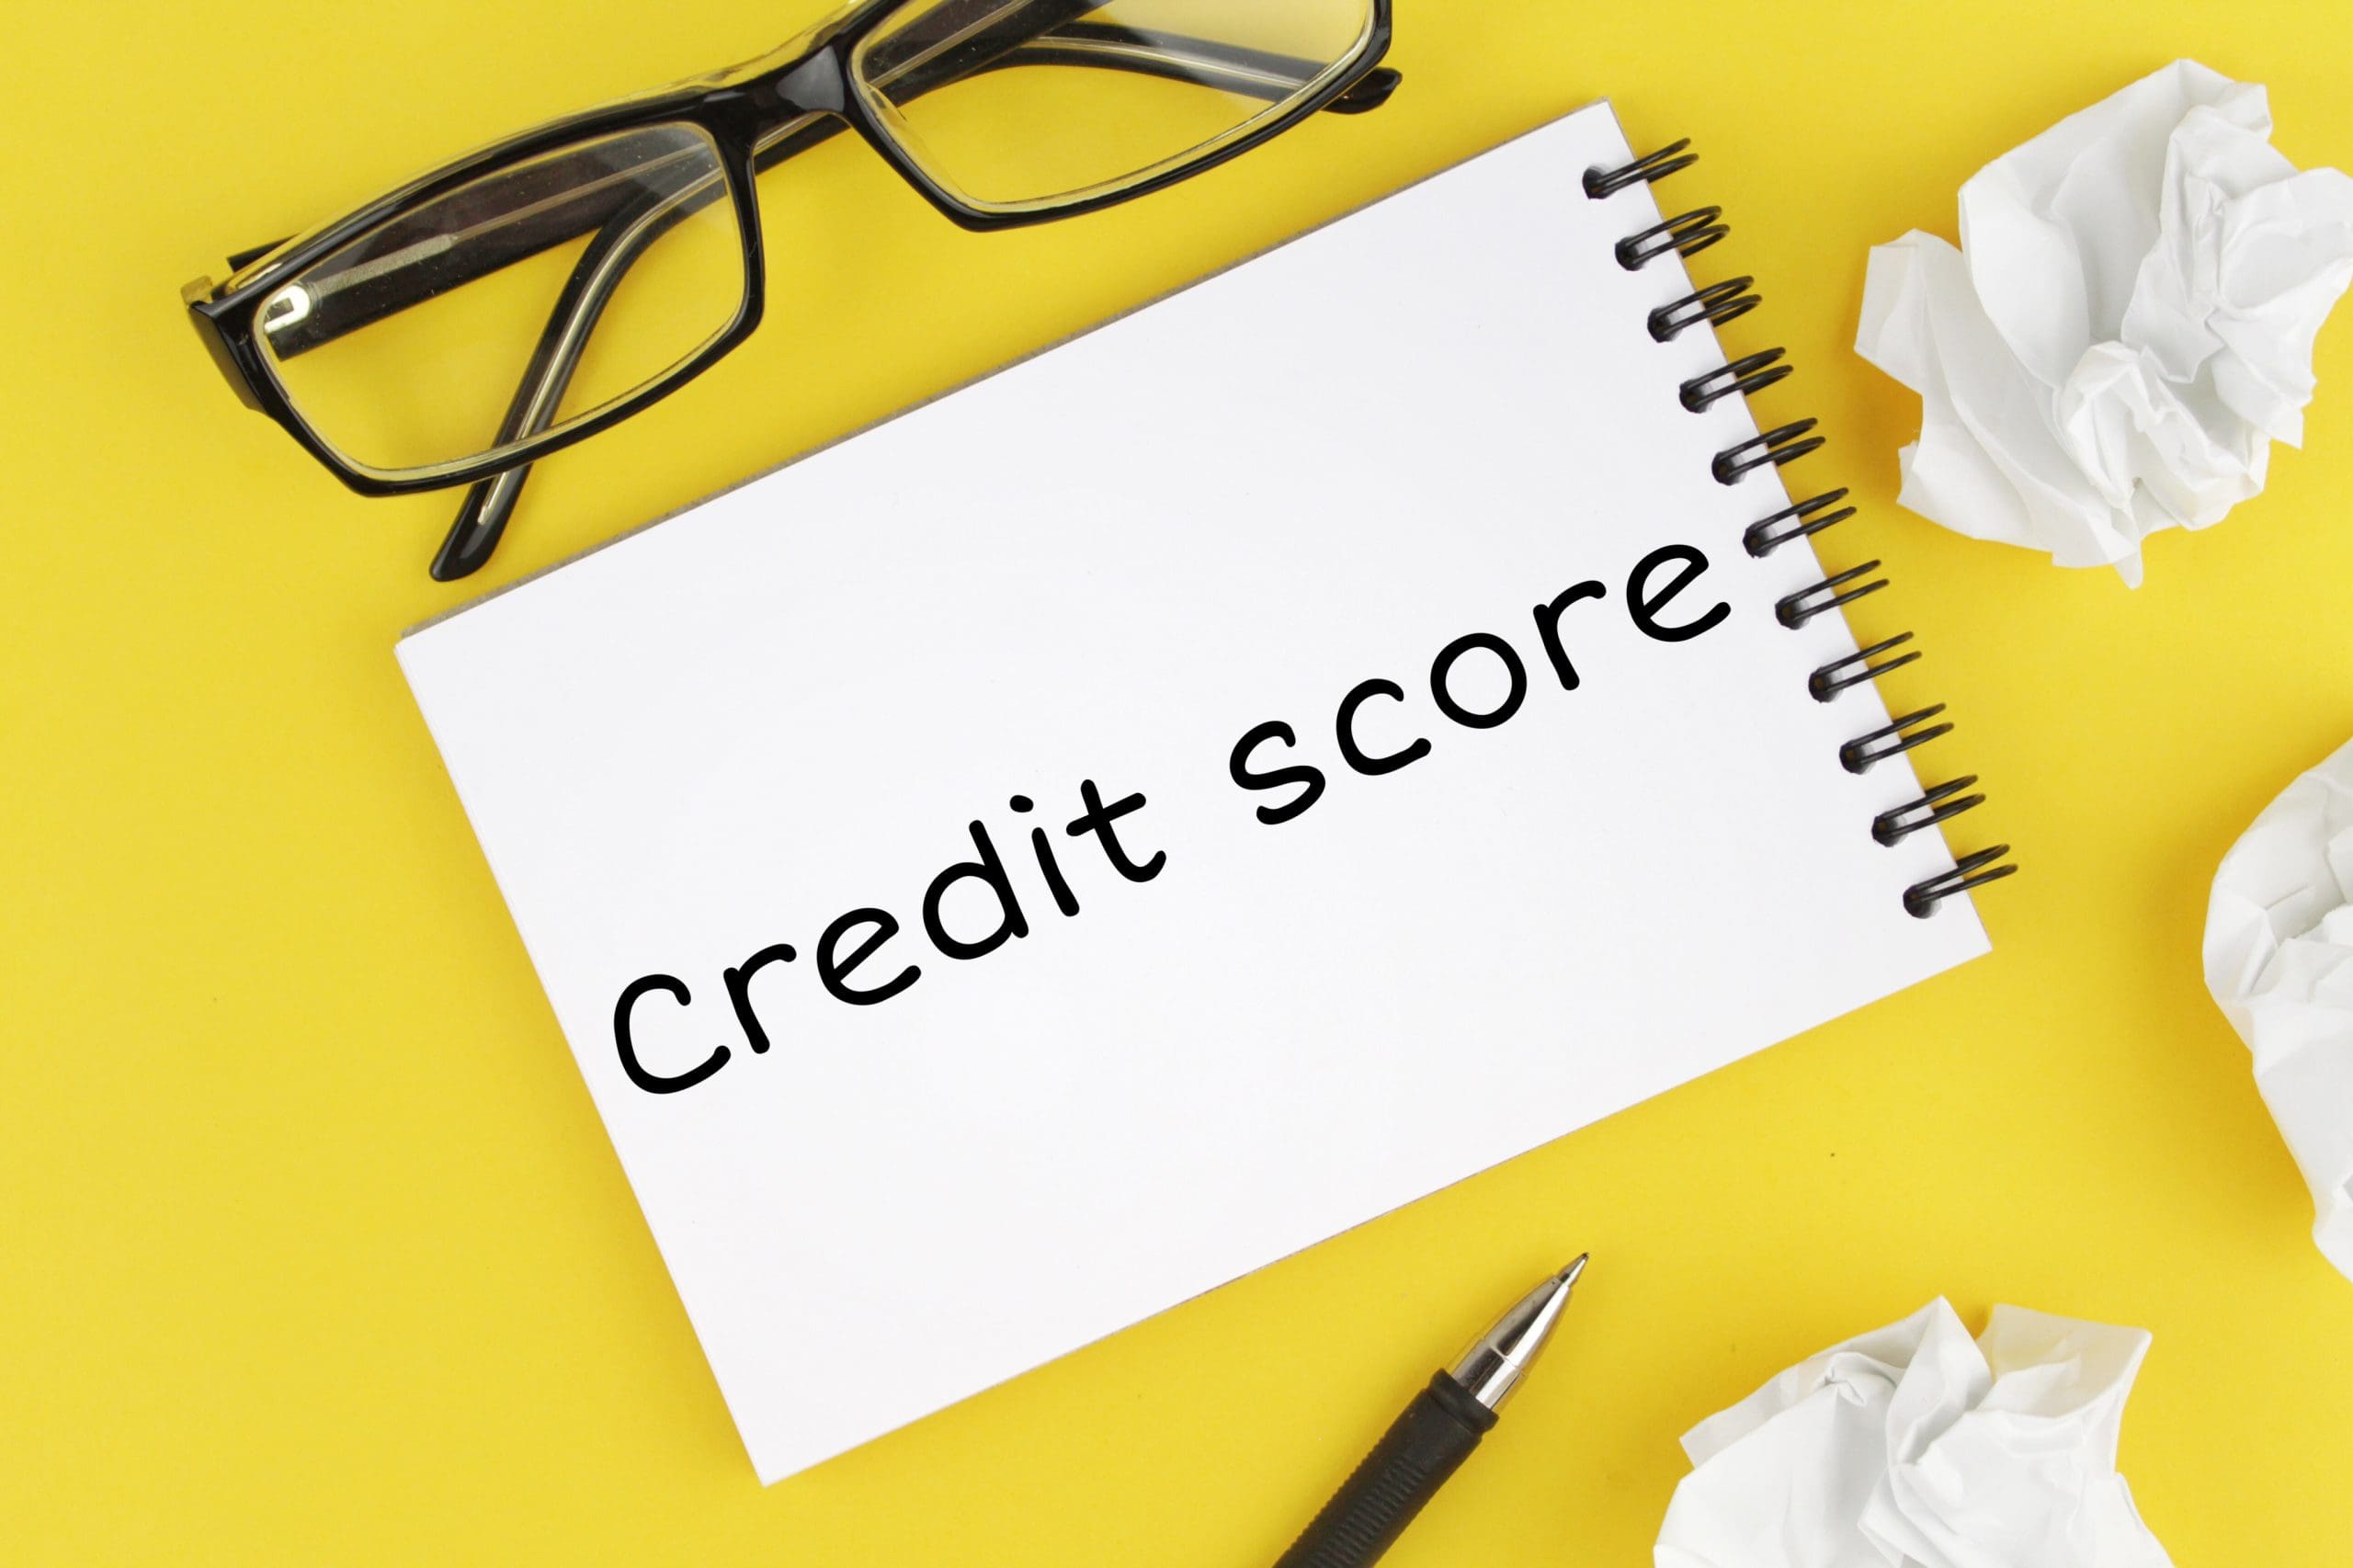 Can You Buy a Home with a 600 Credit Score?